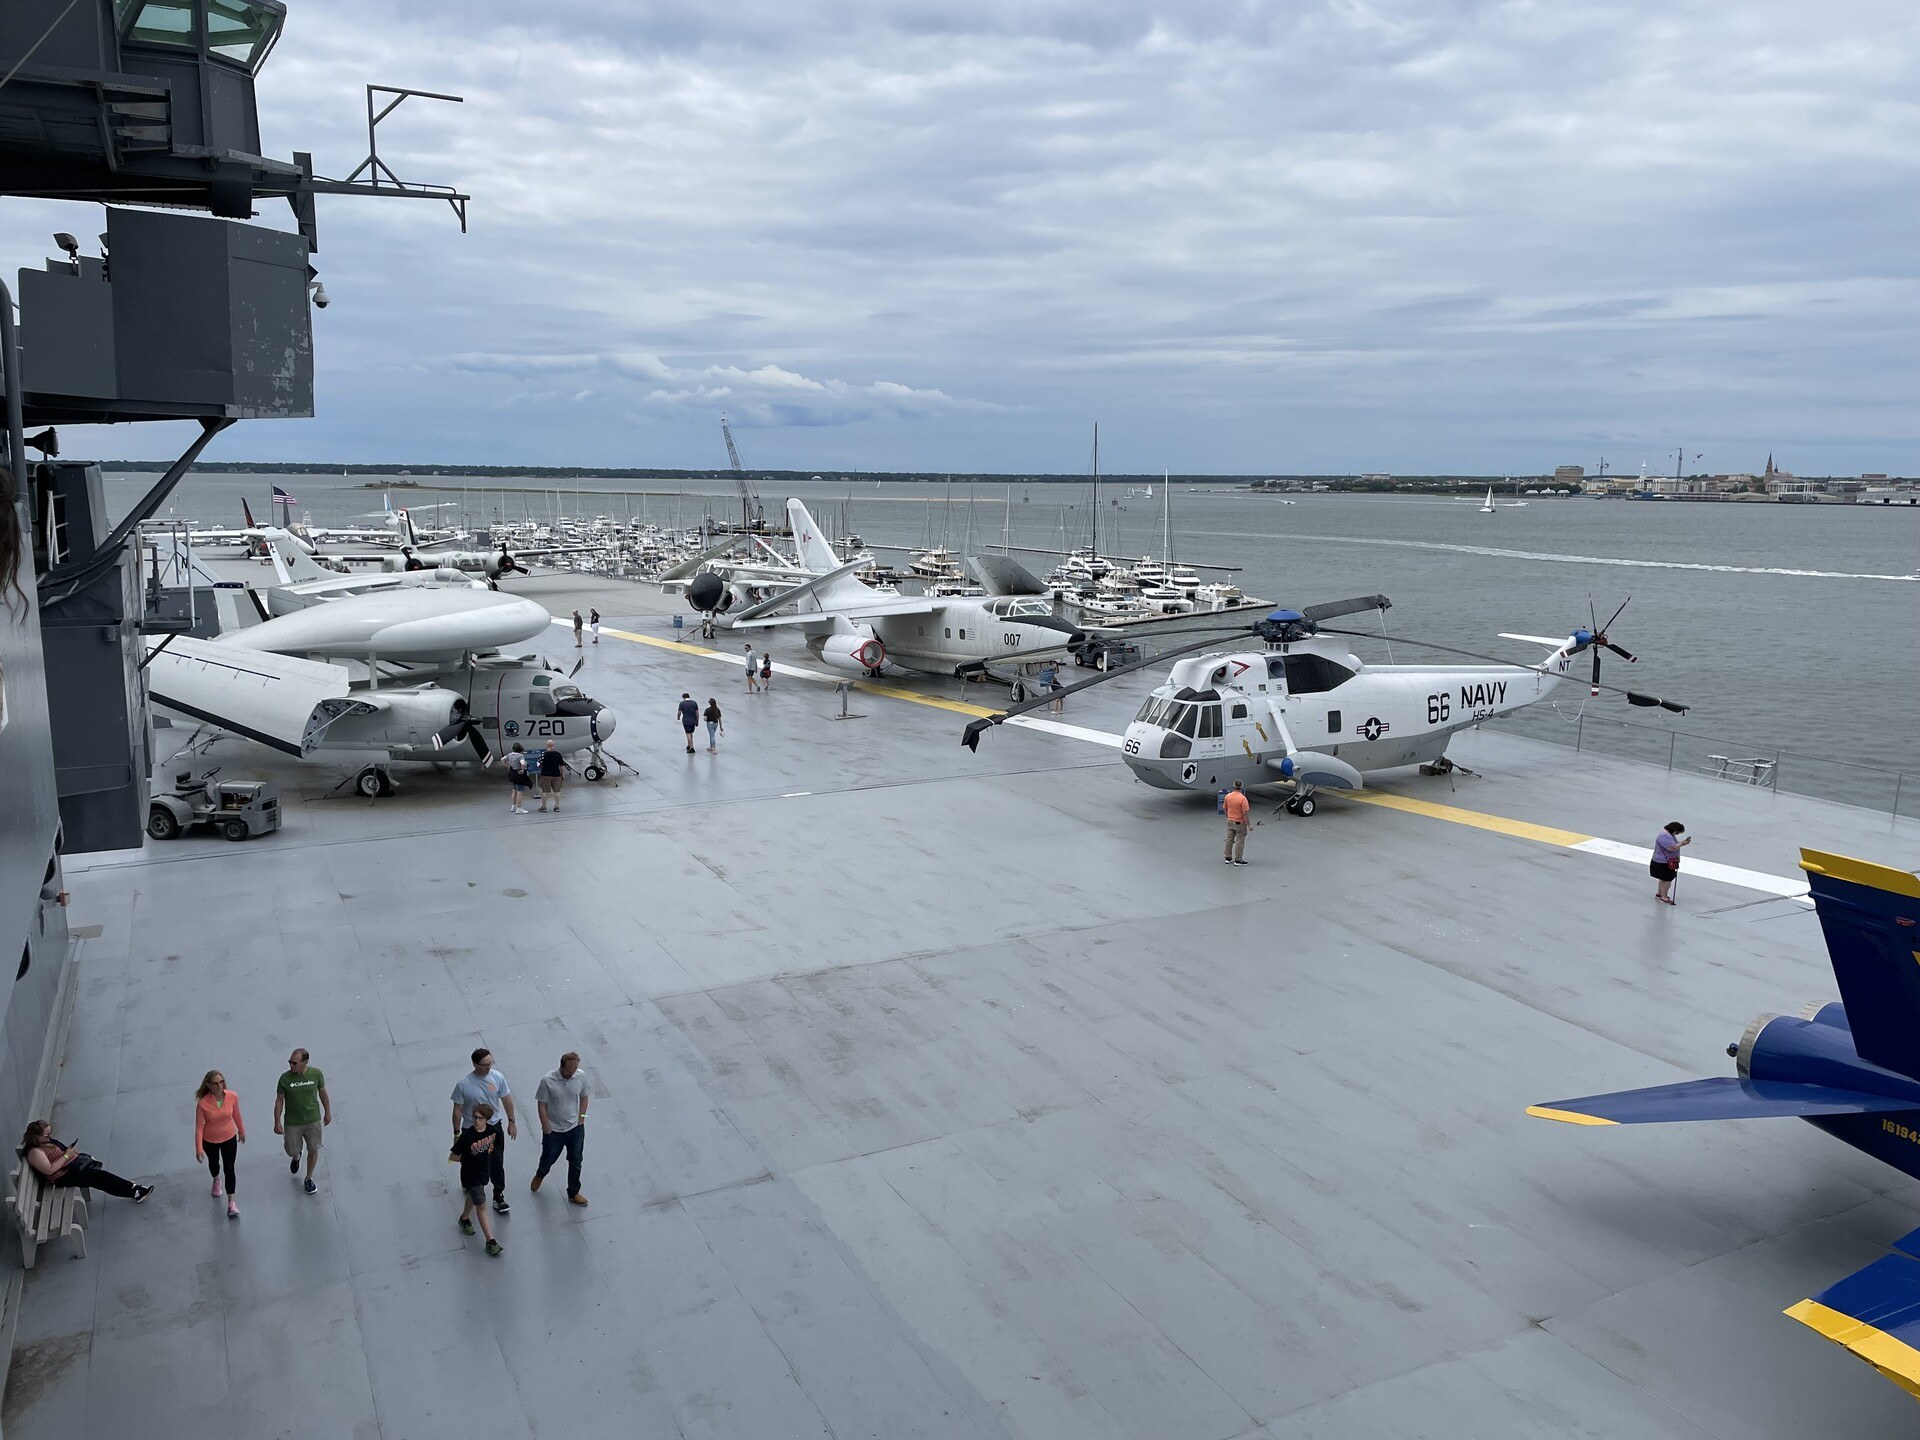 A view of the flight deck of the USS Yorktown, with bored-looking tourists sort of milling about between long-decommissioned aircraft.